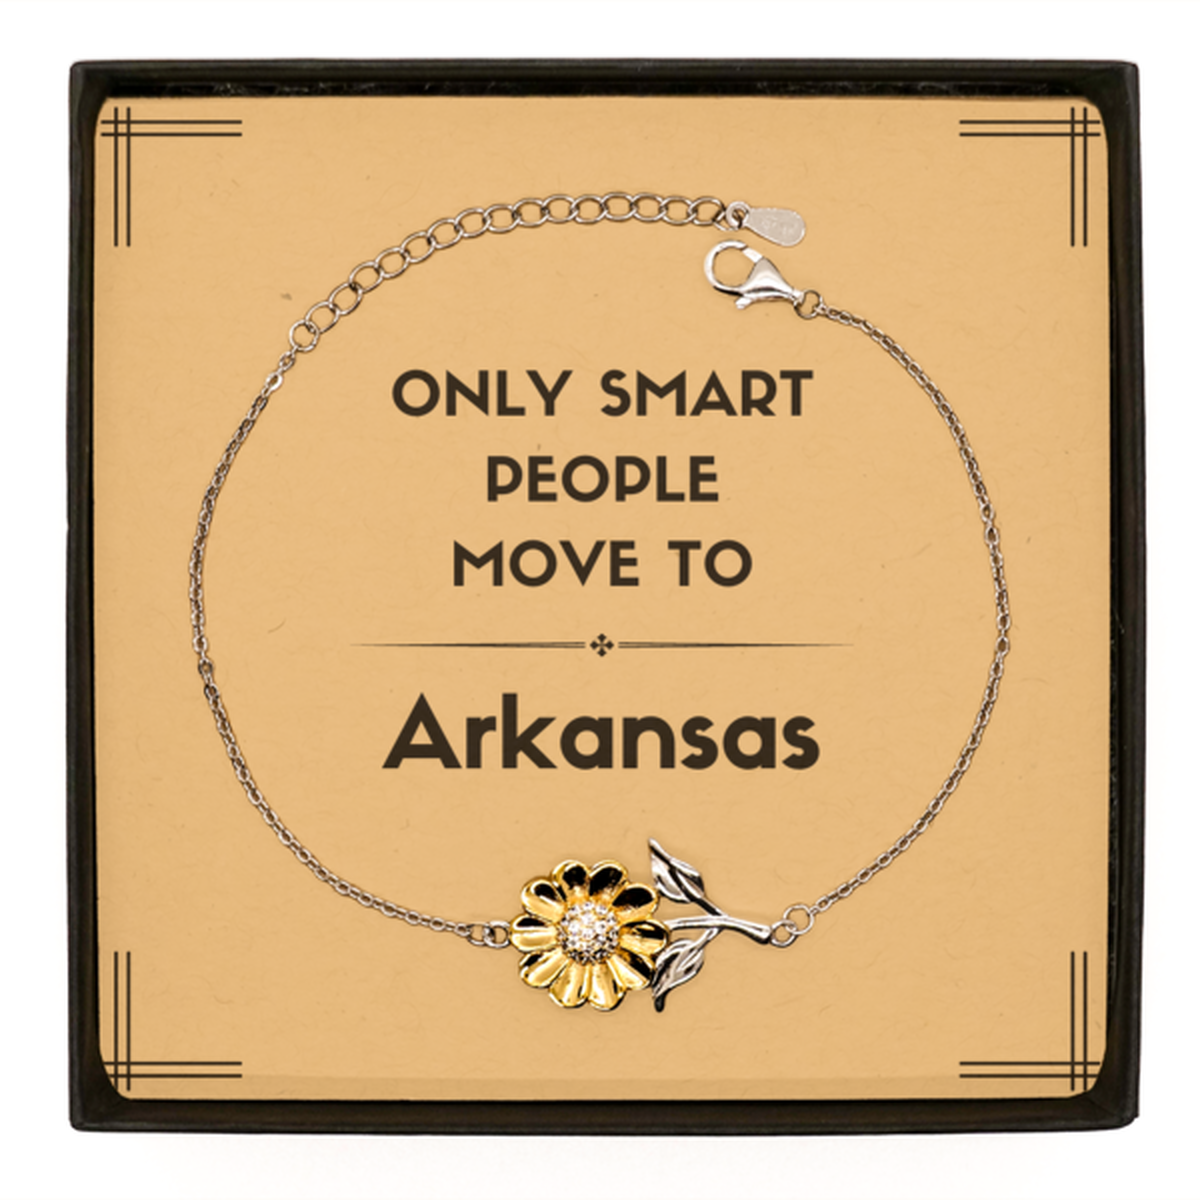 Only smart people move to Arkansas Sunflower Bracelet, Message Card Gifts For Arkansas, Move to Arkansas Gifts for Friends Coworker Funny Saying Quote